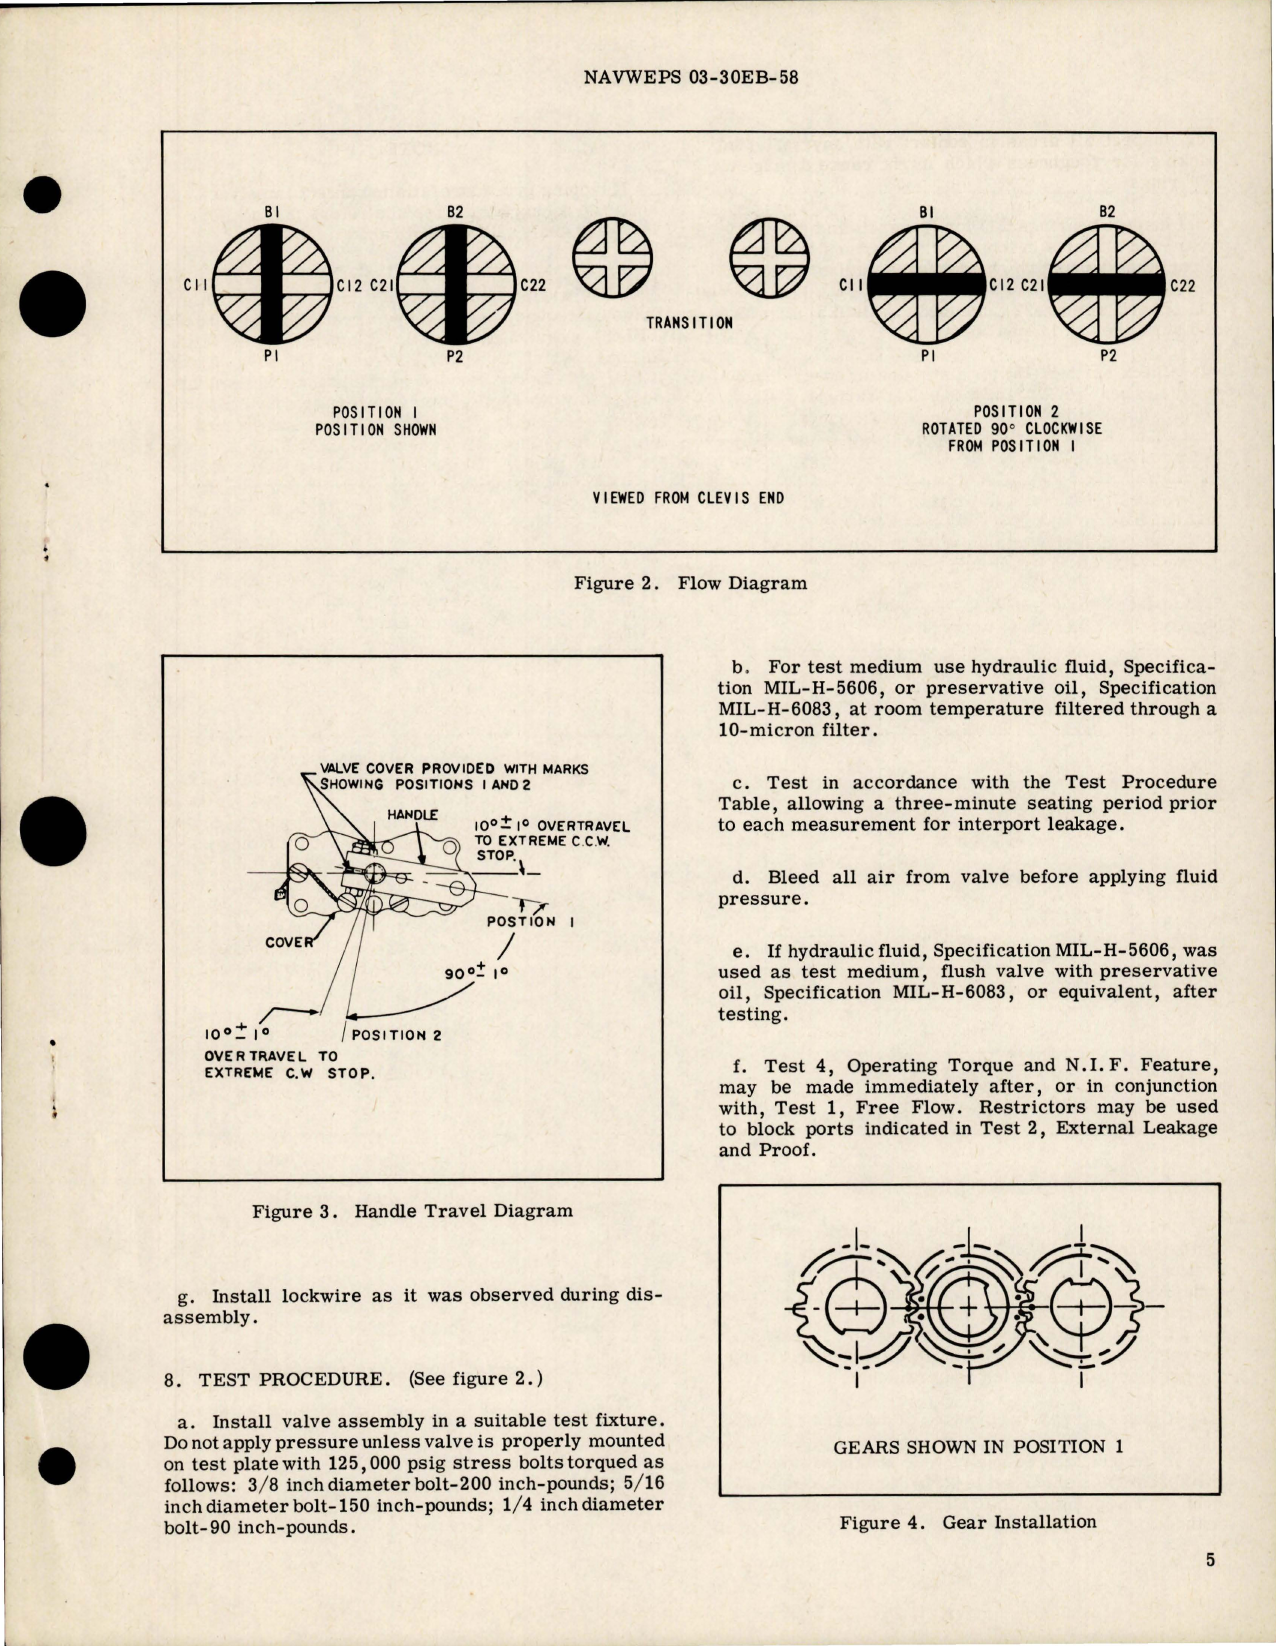 Sample page 5 from AirCorps Library document: Overhaul Instructions with Parts for Manually Operated Rotary Dual Shut Off Valve Assembly - Part 141575-1 